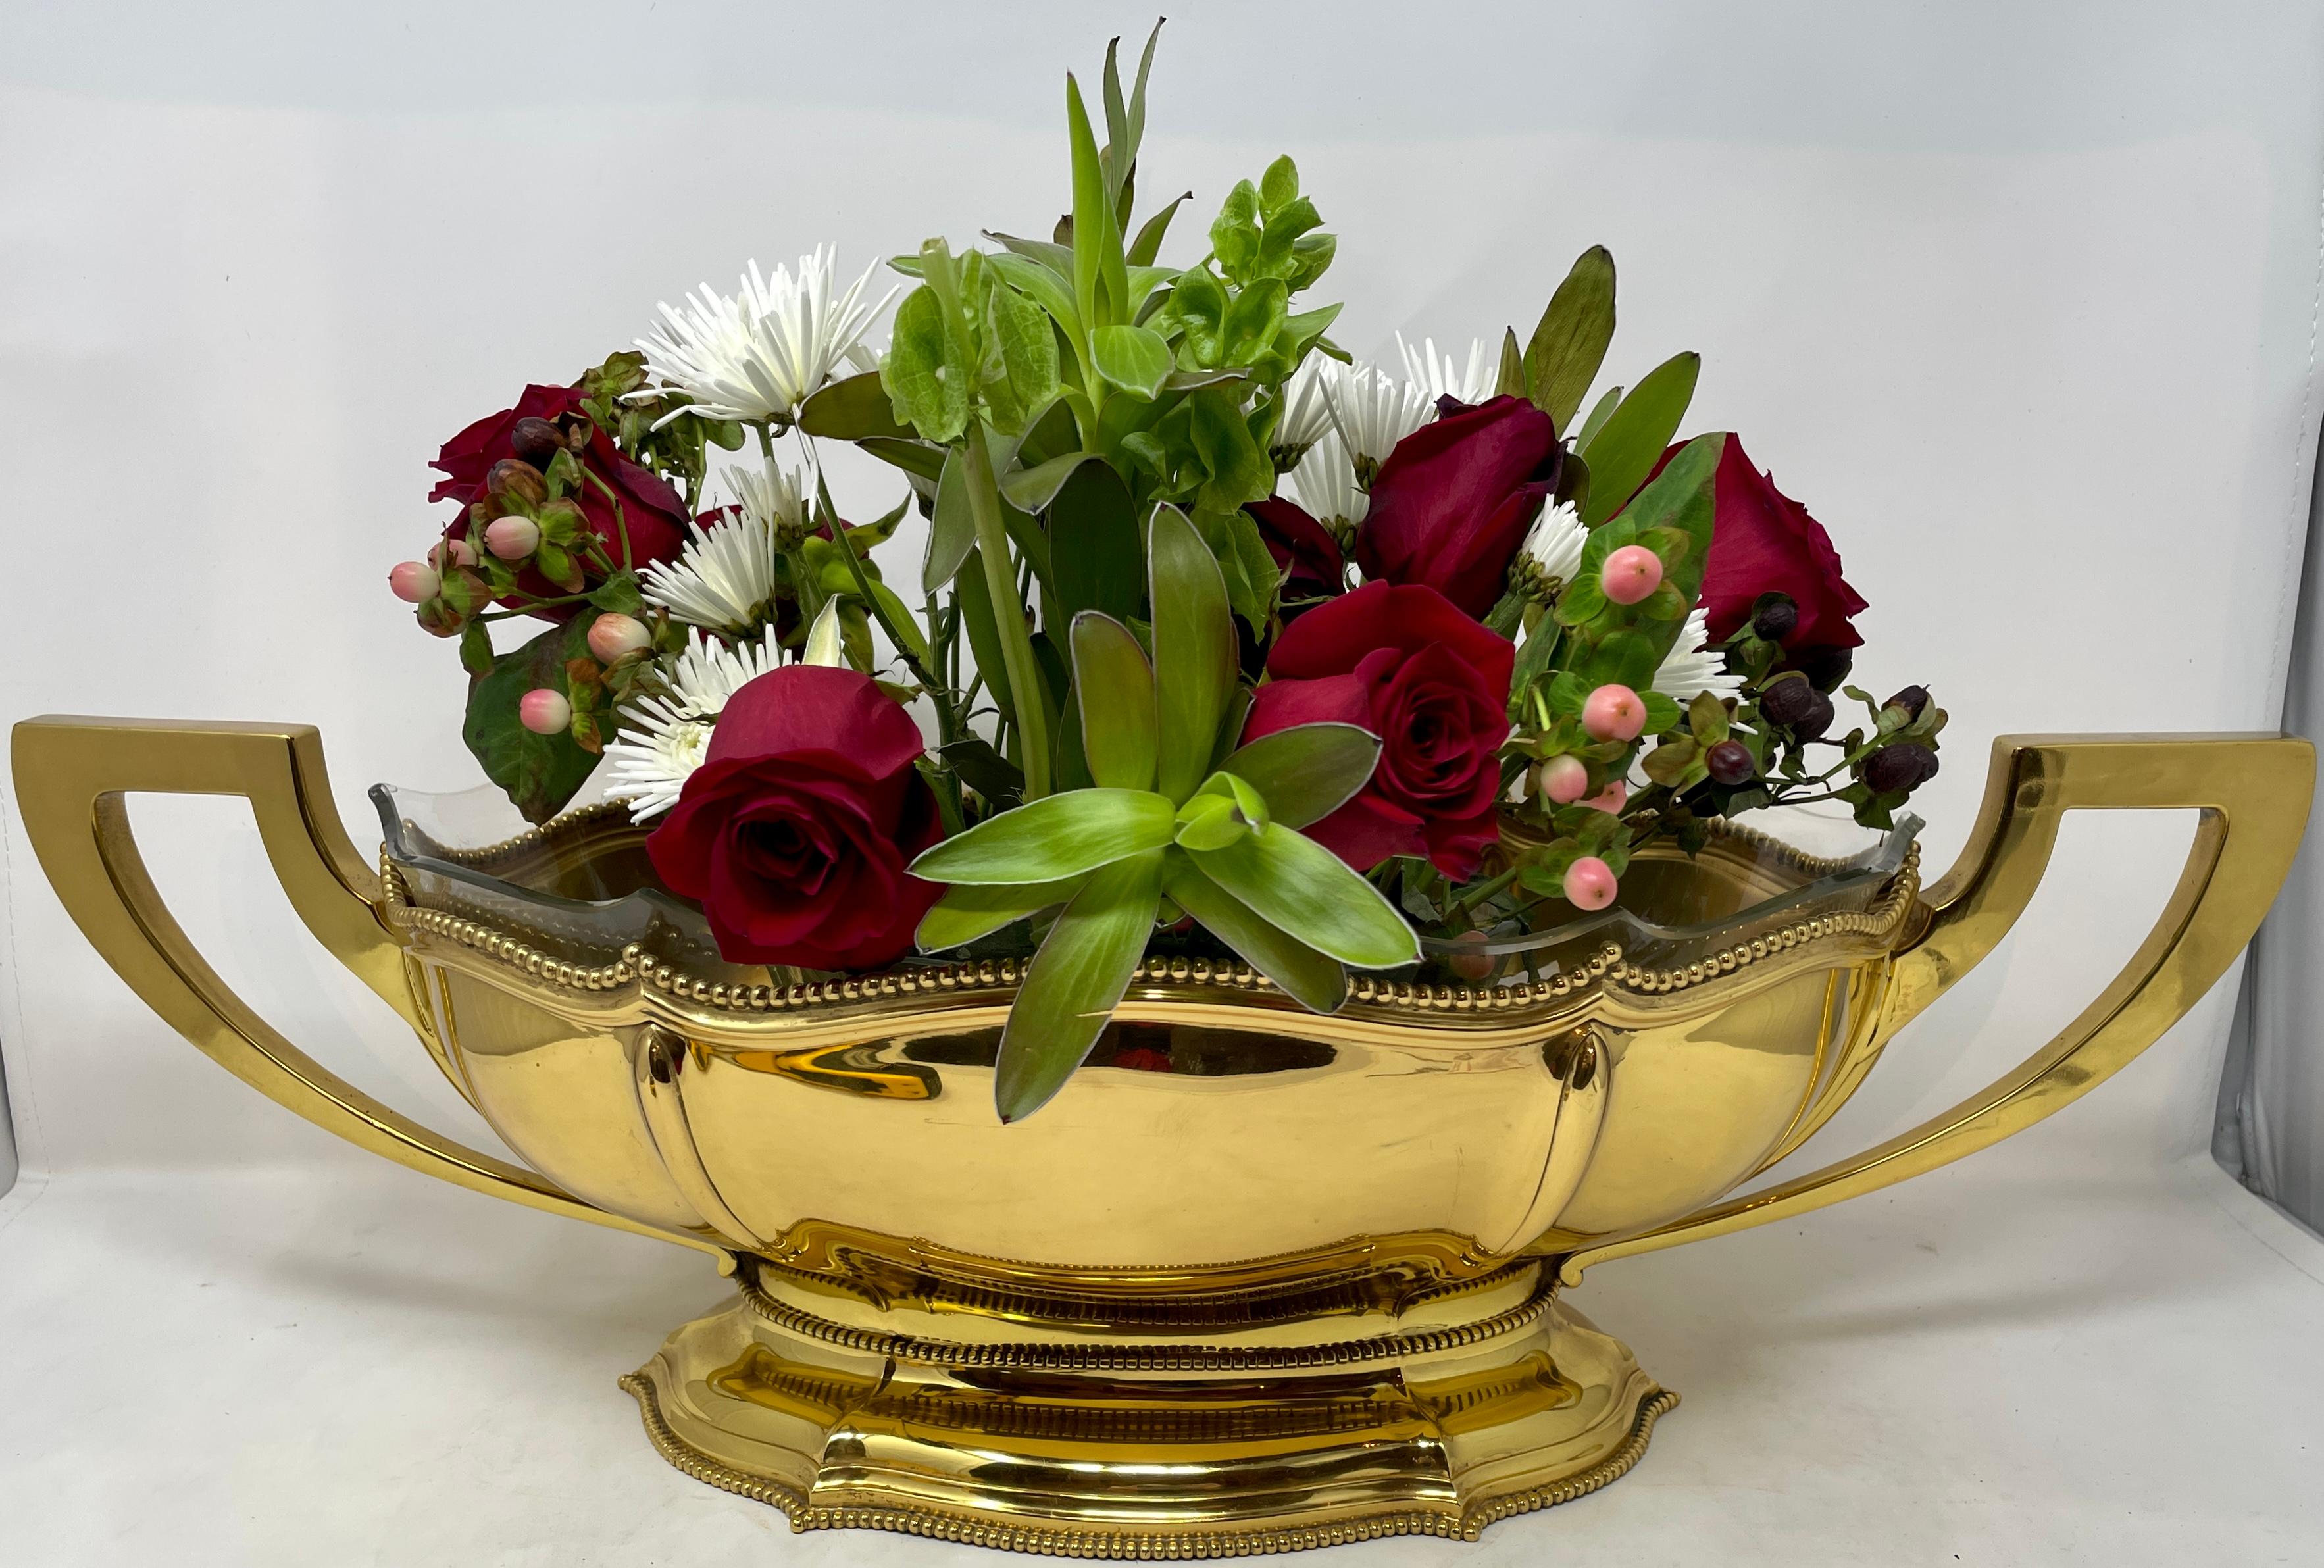 Antique European Gilt silver centerpiece, Circa 1890.
Footed Centerpiece Bowl with Handles, Glass Insert and Delicate Bead Detail.